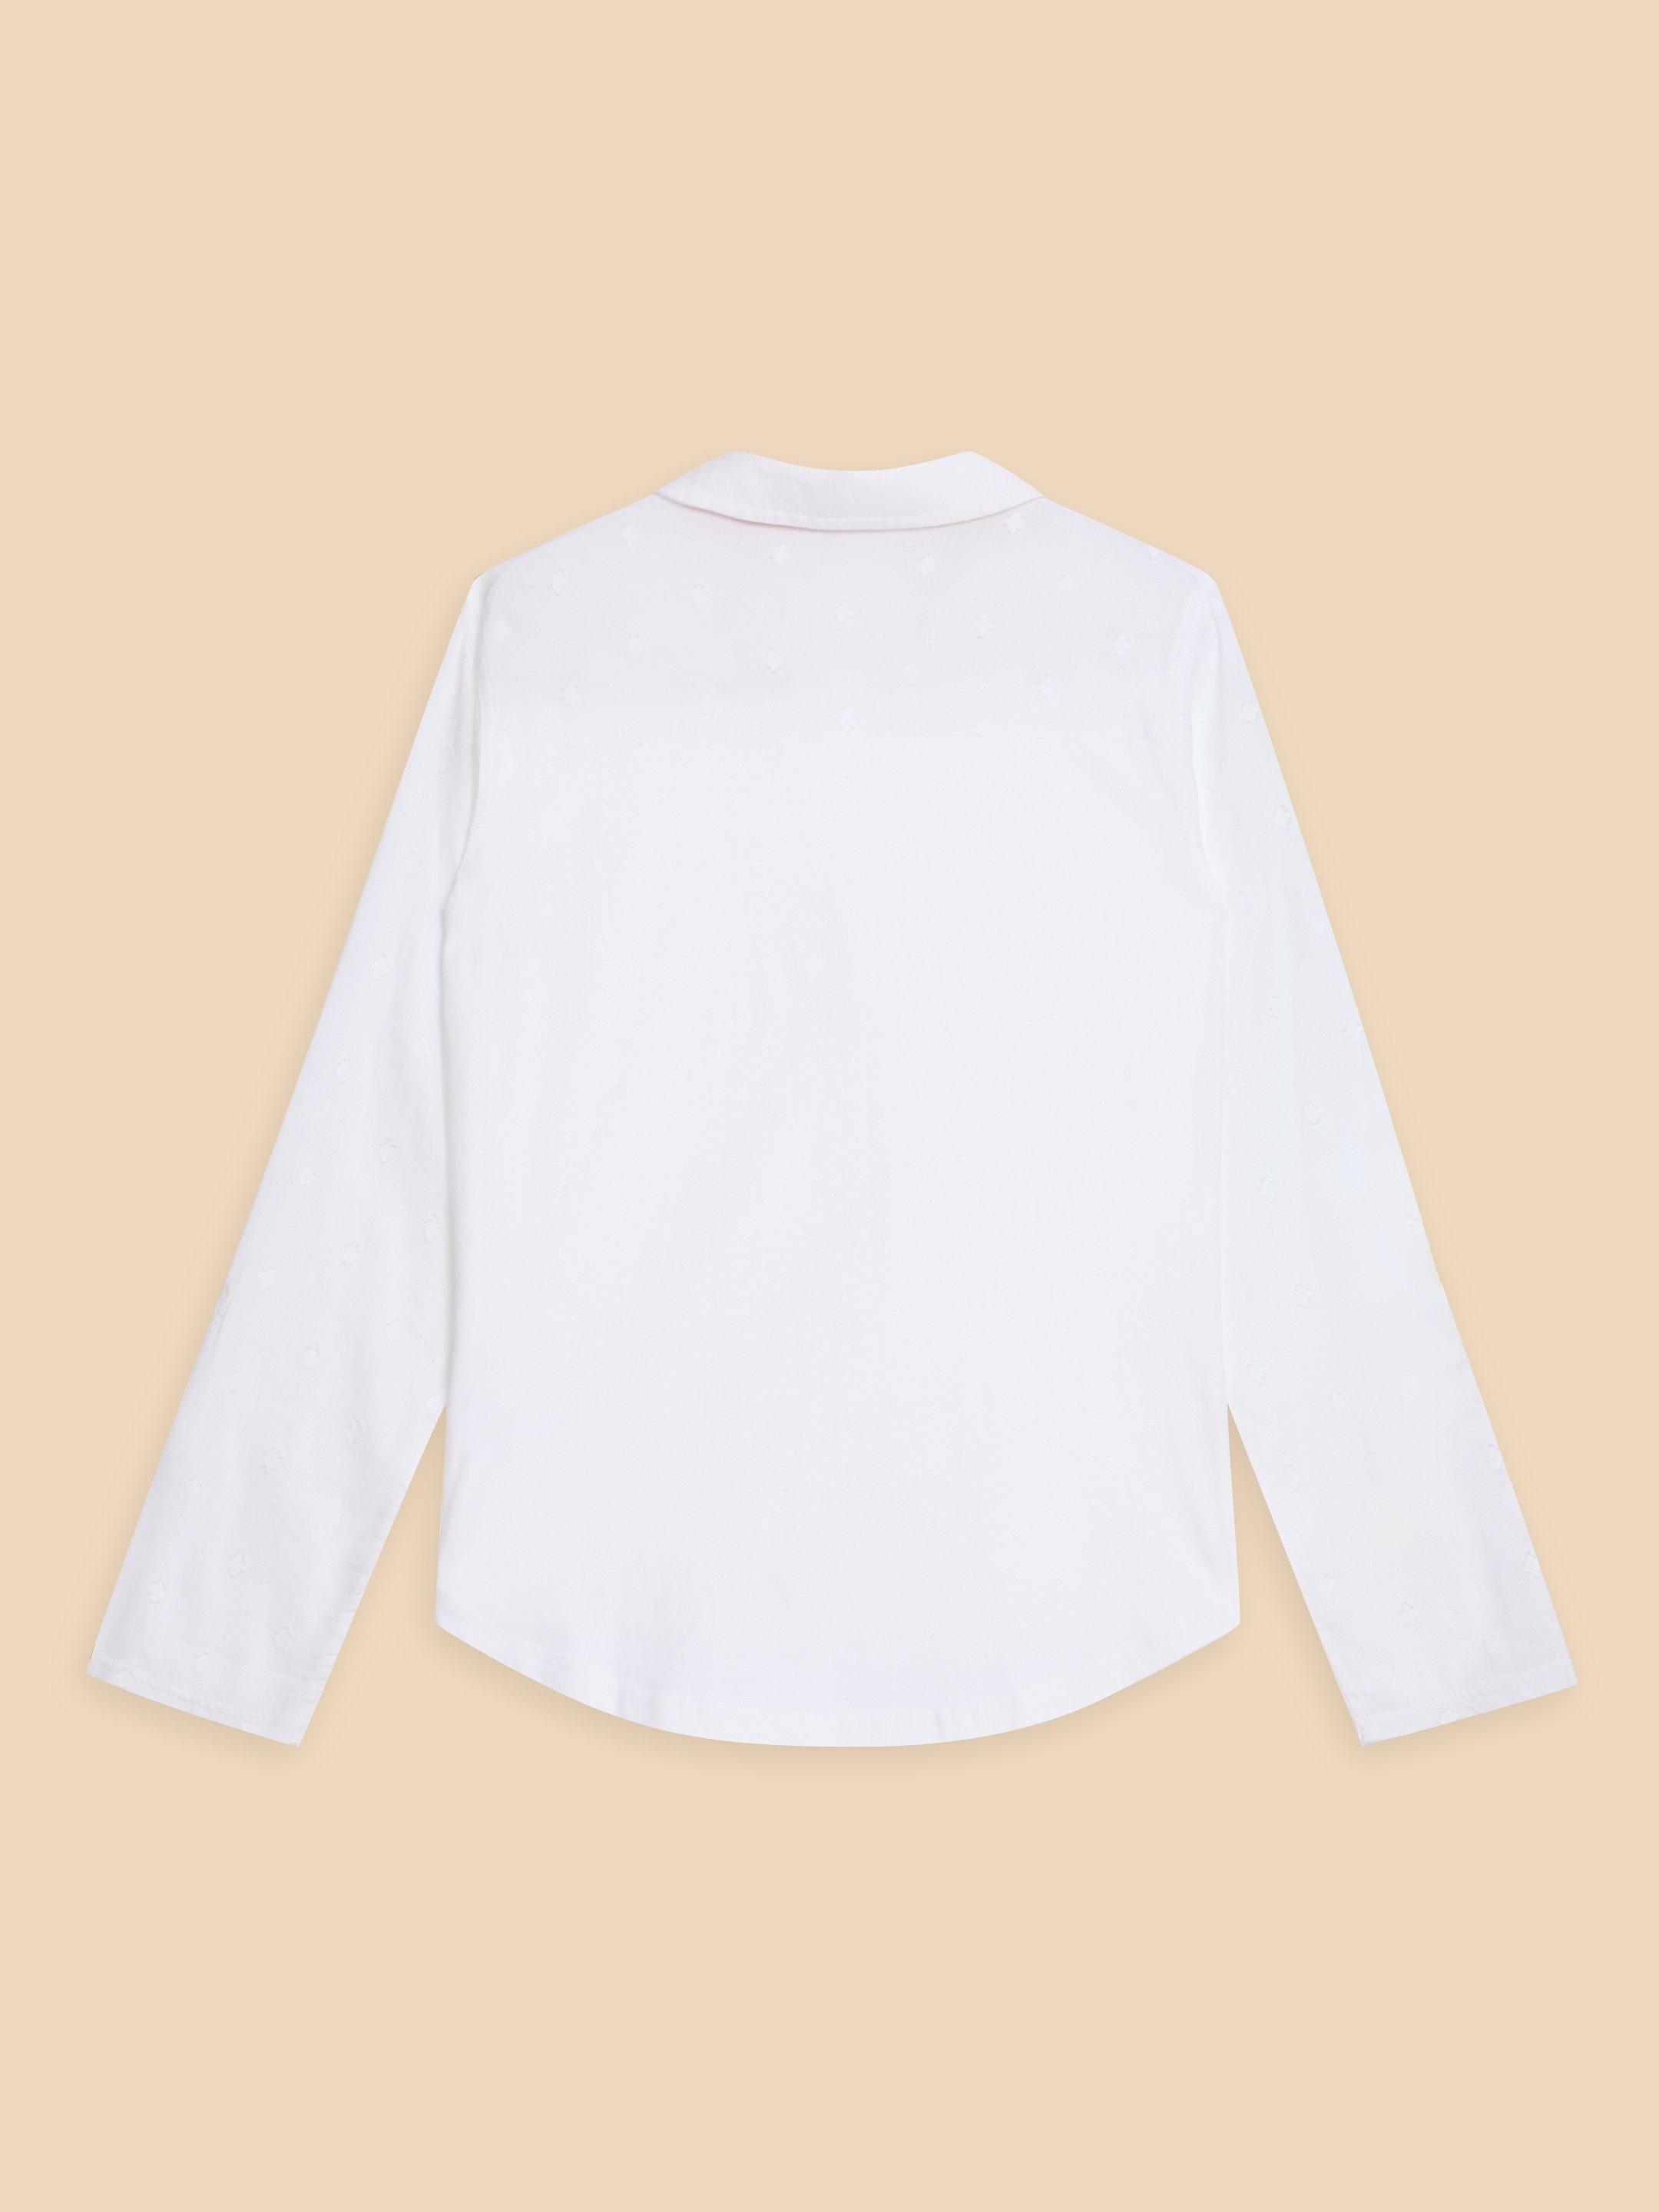 ANNIE MIX JERSEY SHIRT in PALE IVORY - FLAT BACK